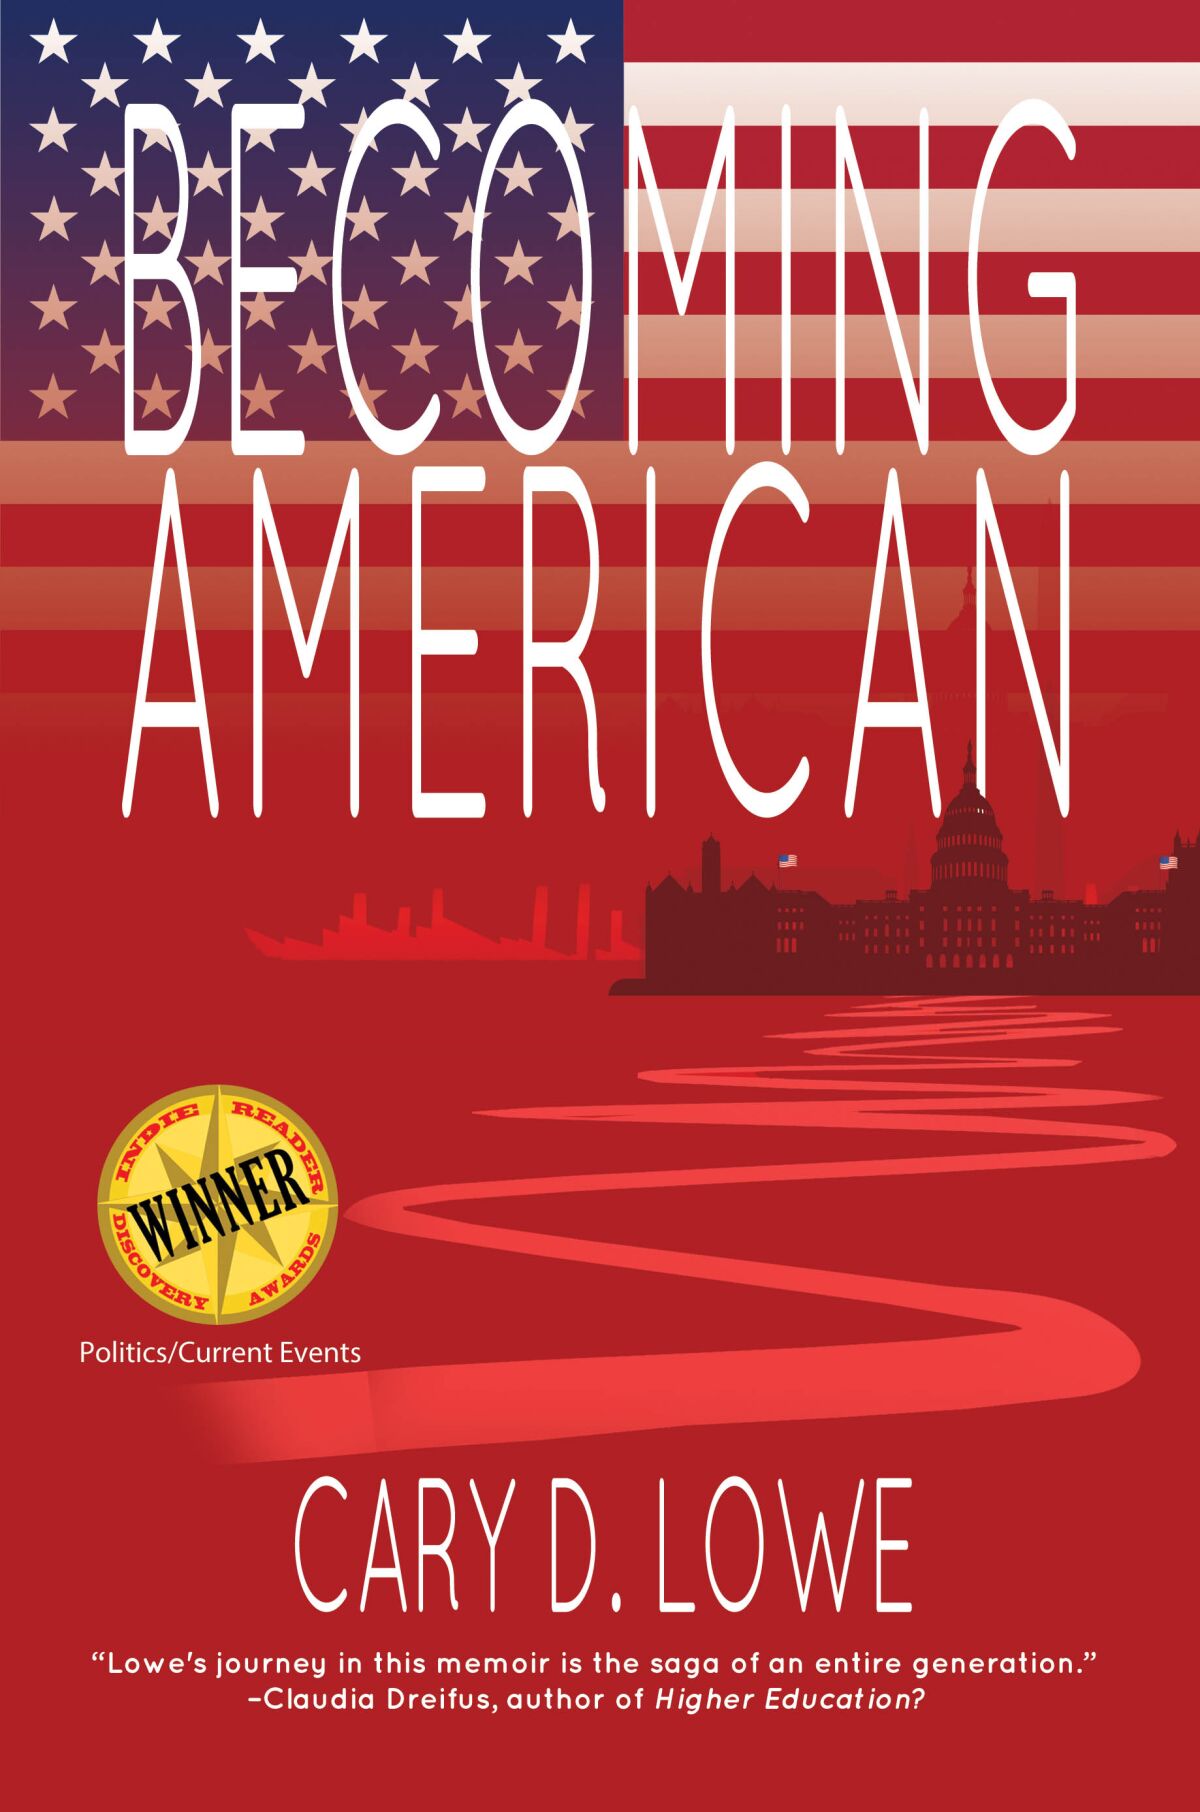 Point Loma resident Cary Lowe's book "Becoming American"